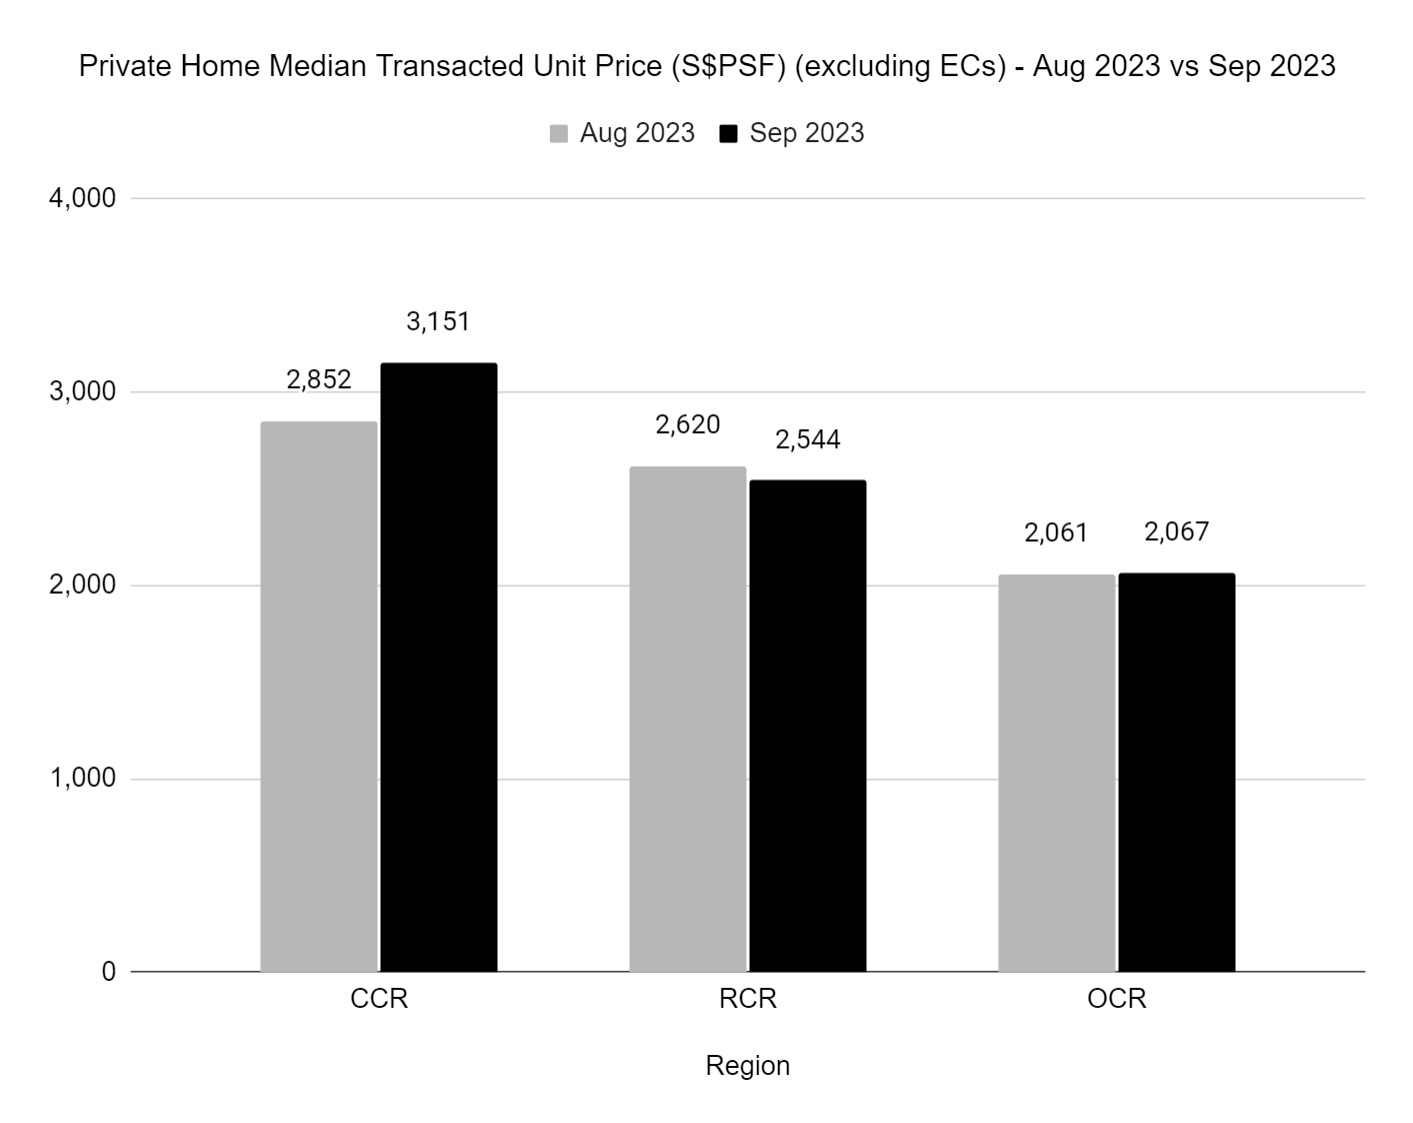 Private Condo Median Transacted Unit Price (S$PSF) between Aug 2023 and Sept 2023